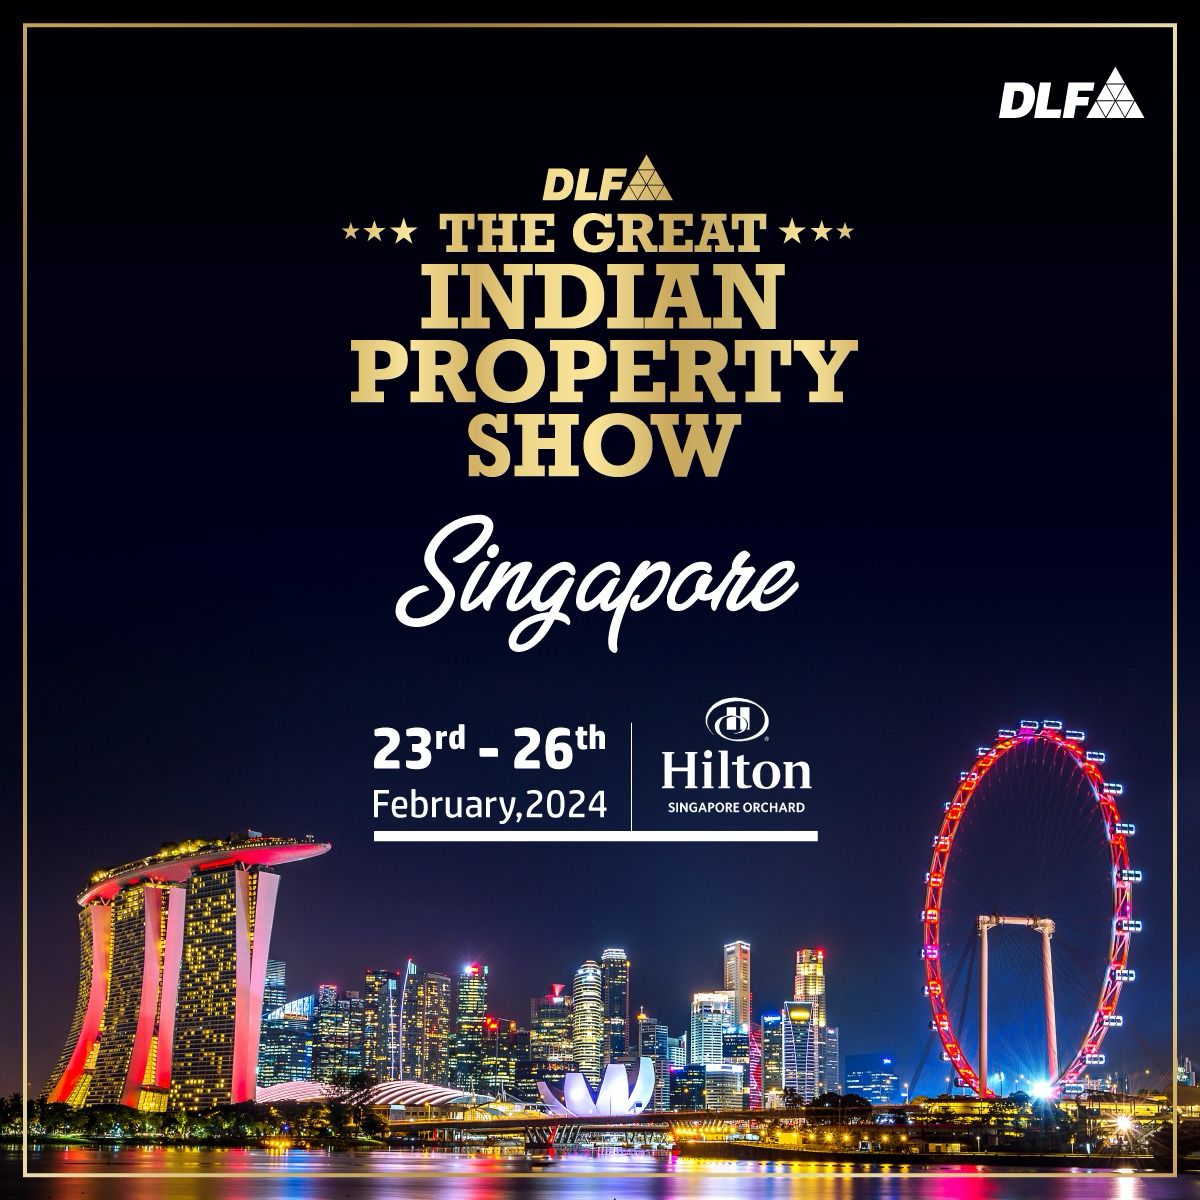 DLF Presents The Great Indian Property Show - A Real Estate Extravaganza in Singapore Update